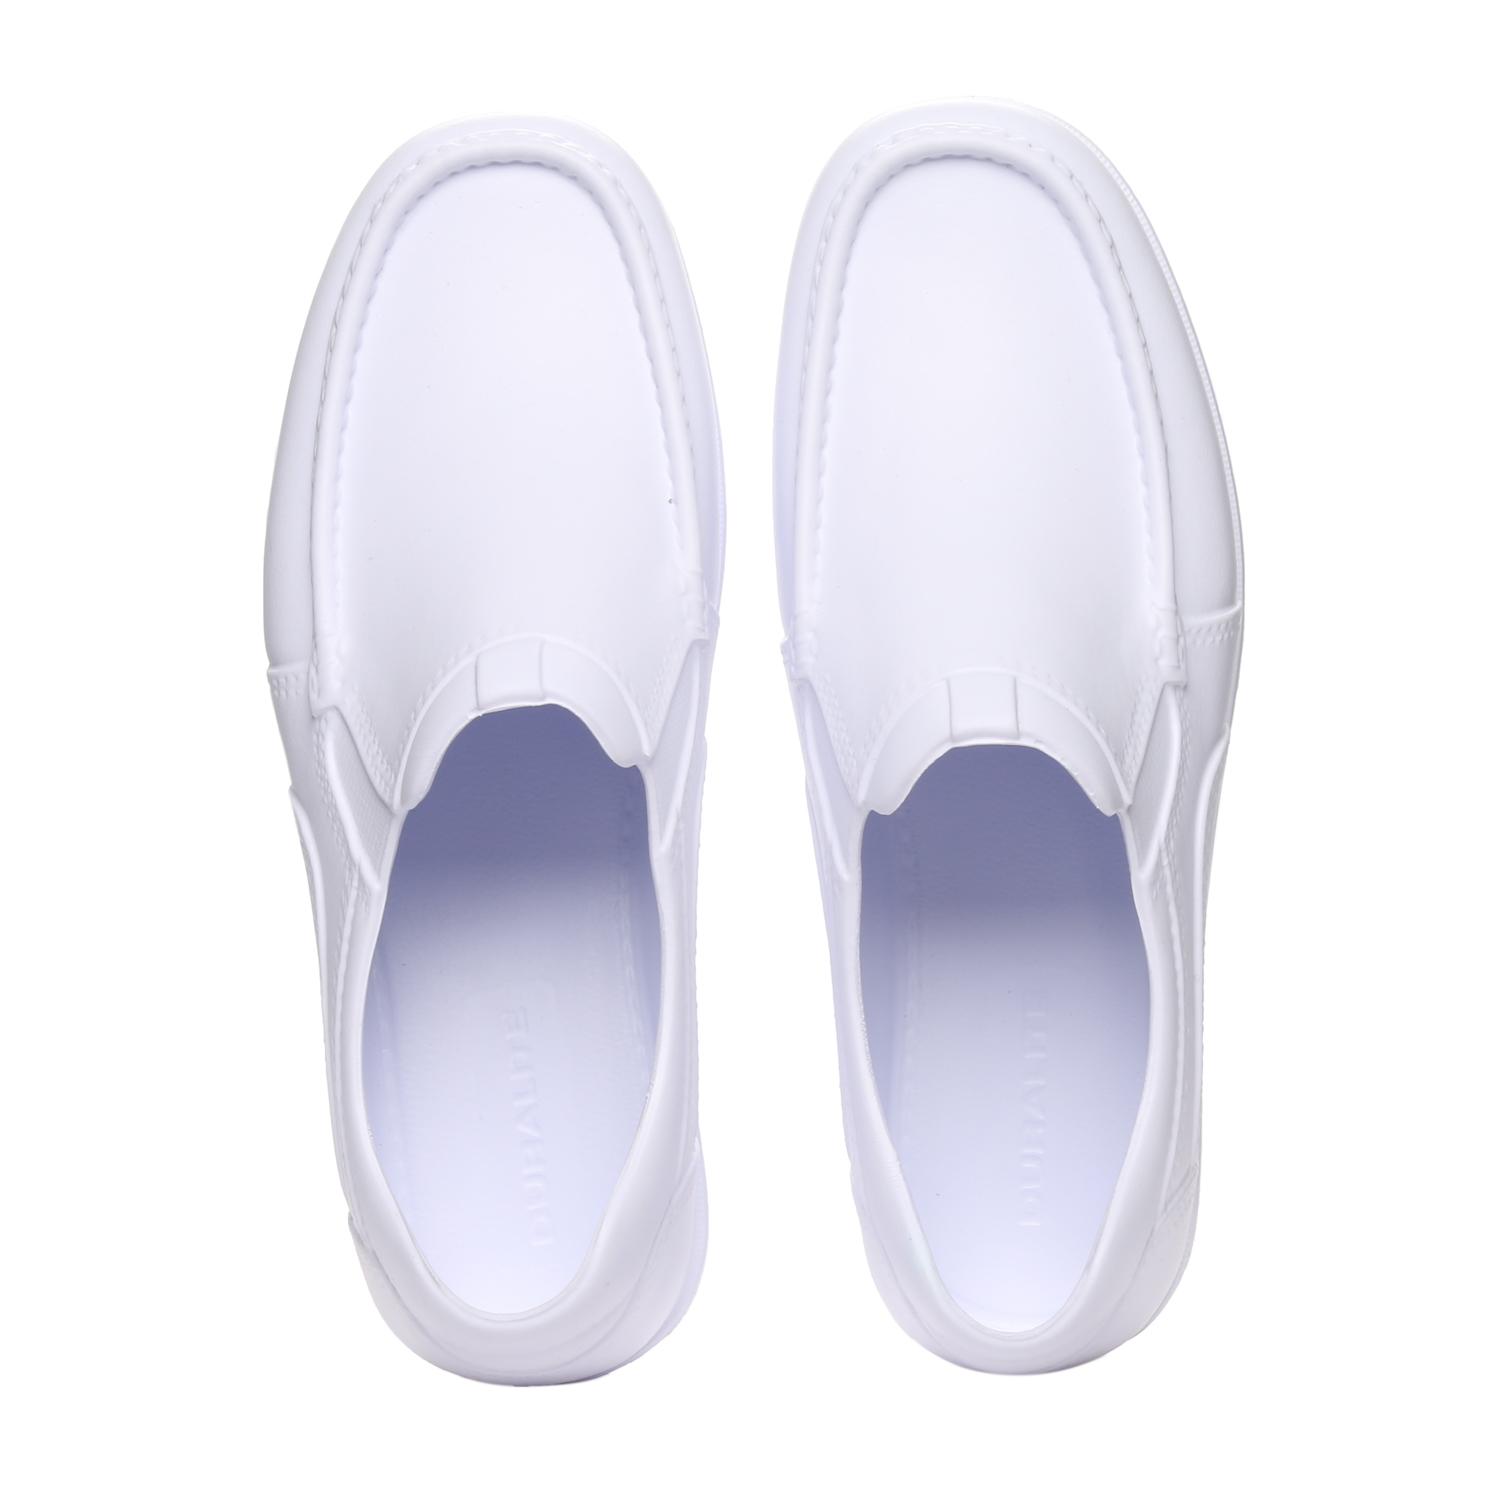 Duralite Mens Raul Loafers in White review and price